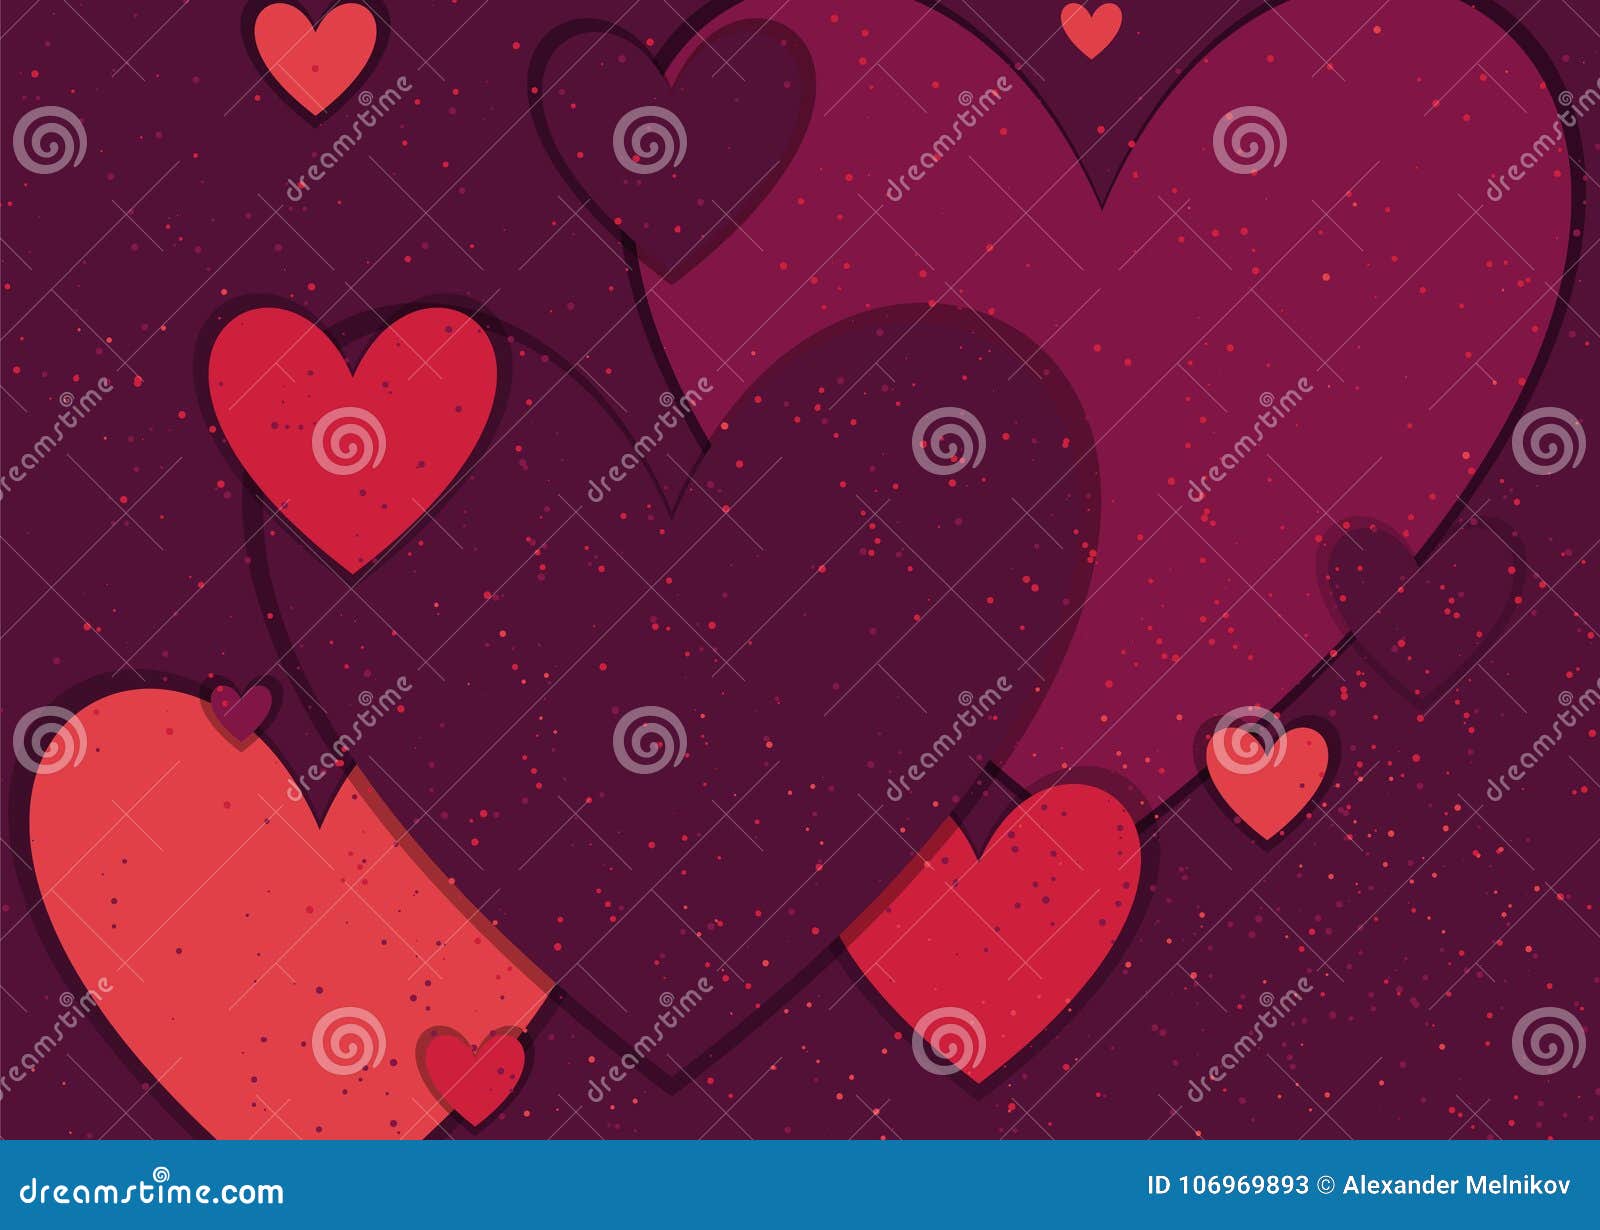 Festive Background with Hearts Stock Vector - Illustration of design ...